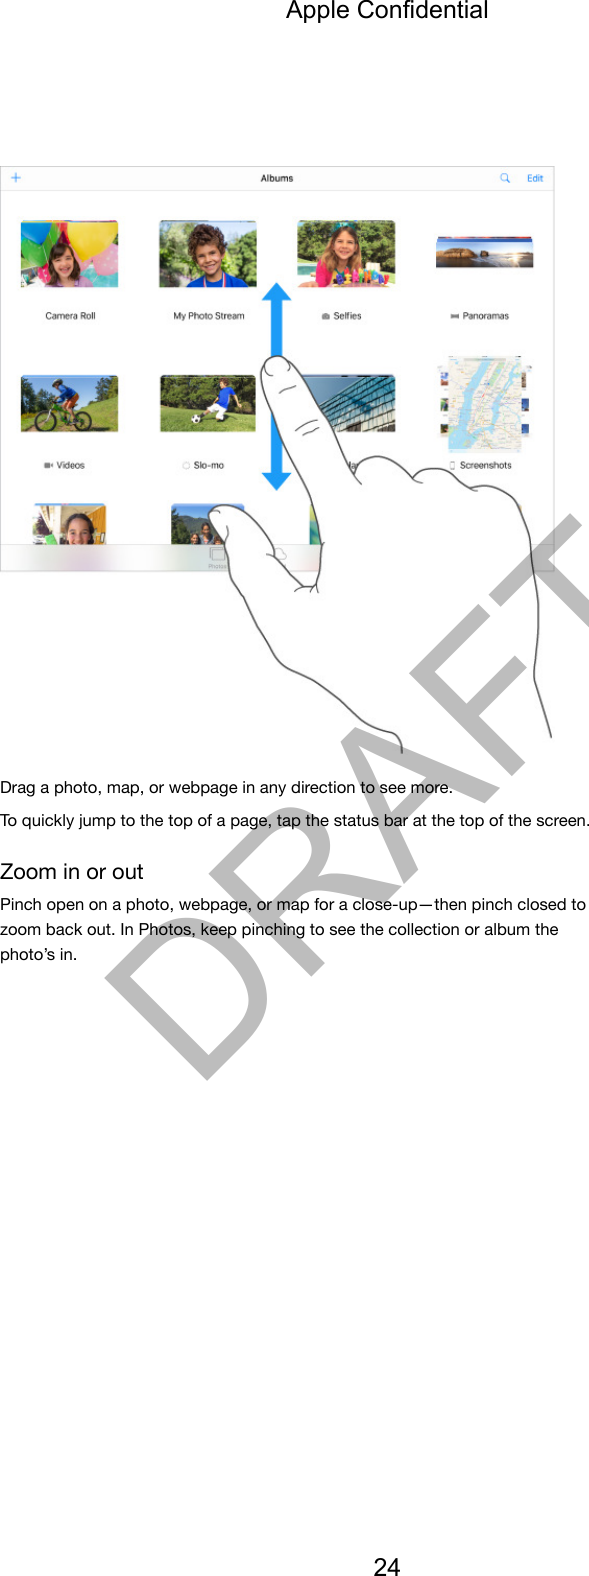 Drag a photo, map, or webpage in any direction to see more.To quickly jump to the top of a page, tap the status bar at the top of the screen.Zoom in or outPinch open on a photo, webpage, or map for a close-up—then pinch closed tozoom back out. In Photos, keep pinching to see the collection or album thephoto’s in.Apple Confidential24DRAFT